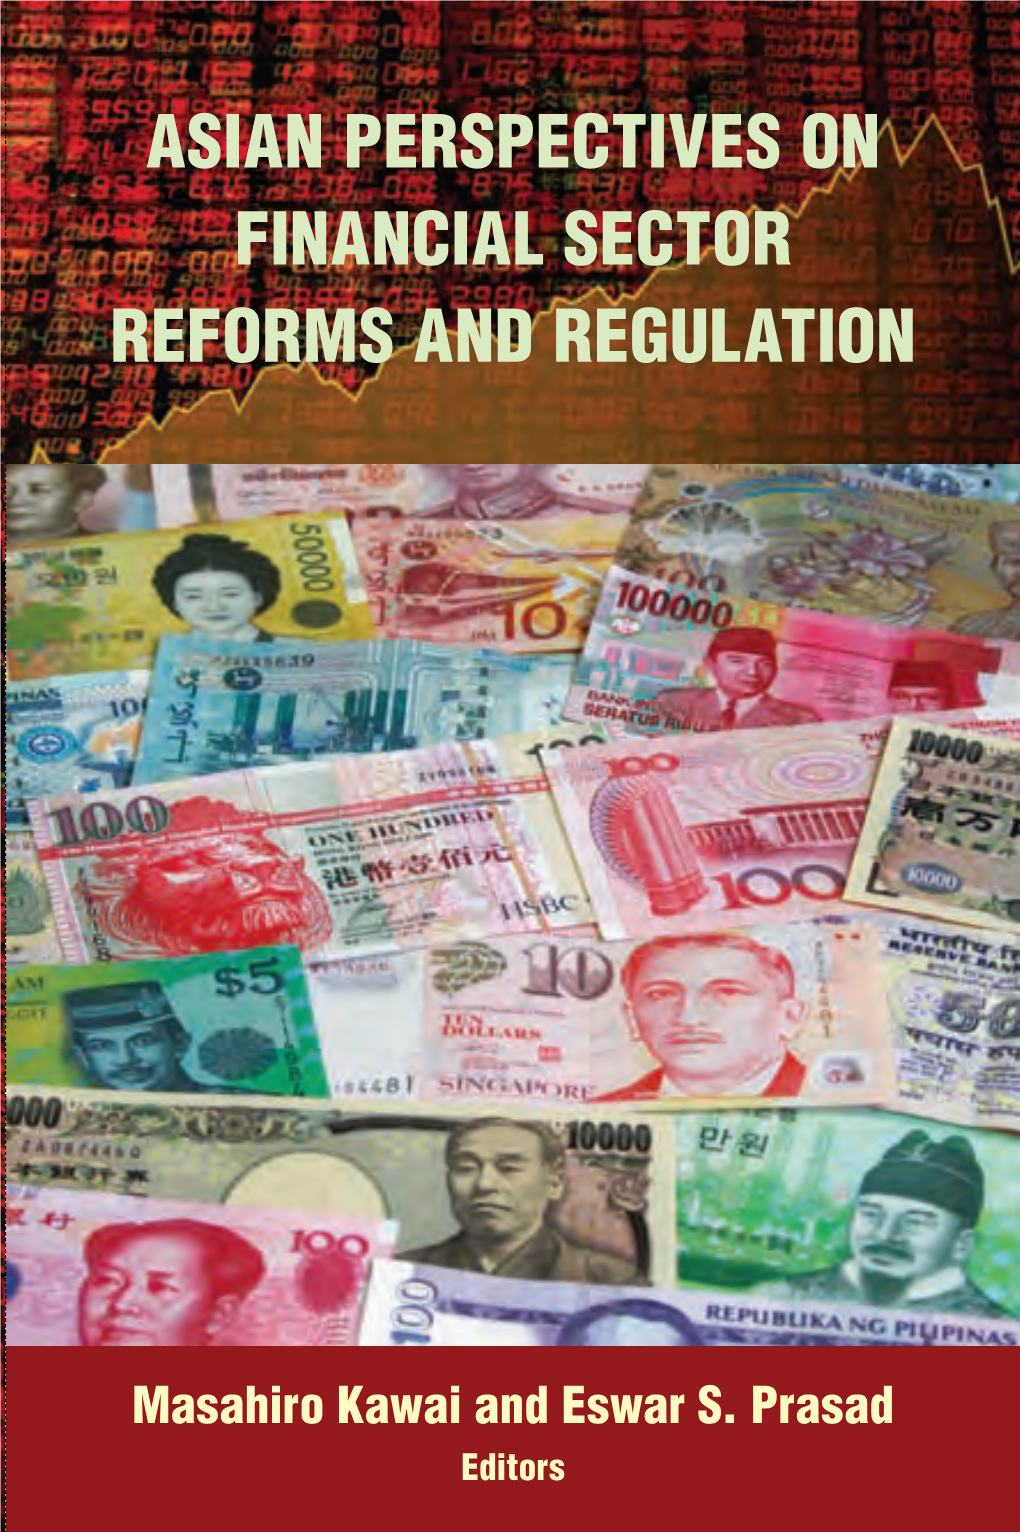 Asian Perspectives on Financial Sector Reforms and Regulation 12689-00 FM-Rev2.Qxd 10/5/11 12:17 PM Page Ii 12689-00 FM-Rev2.Qxd 10/5/11 12:17 PM Page Iii